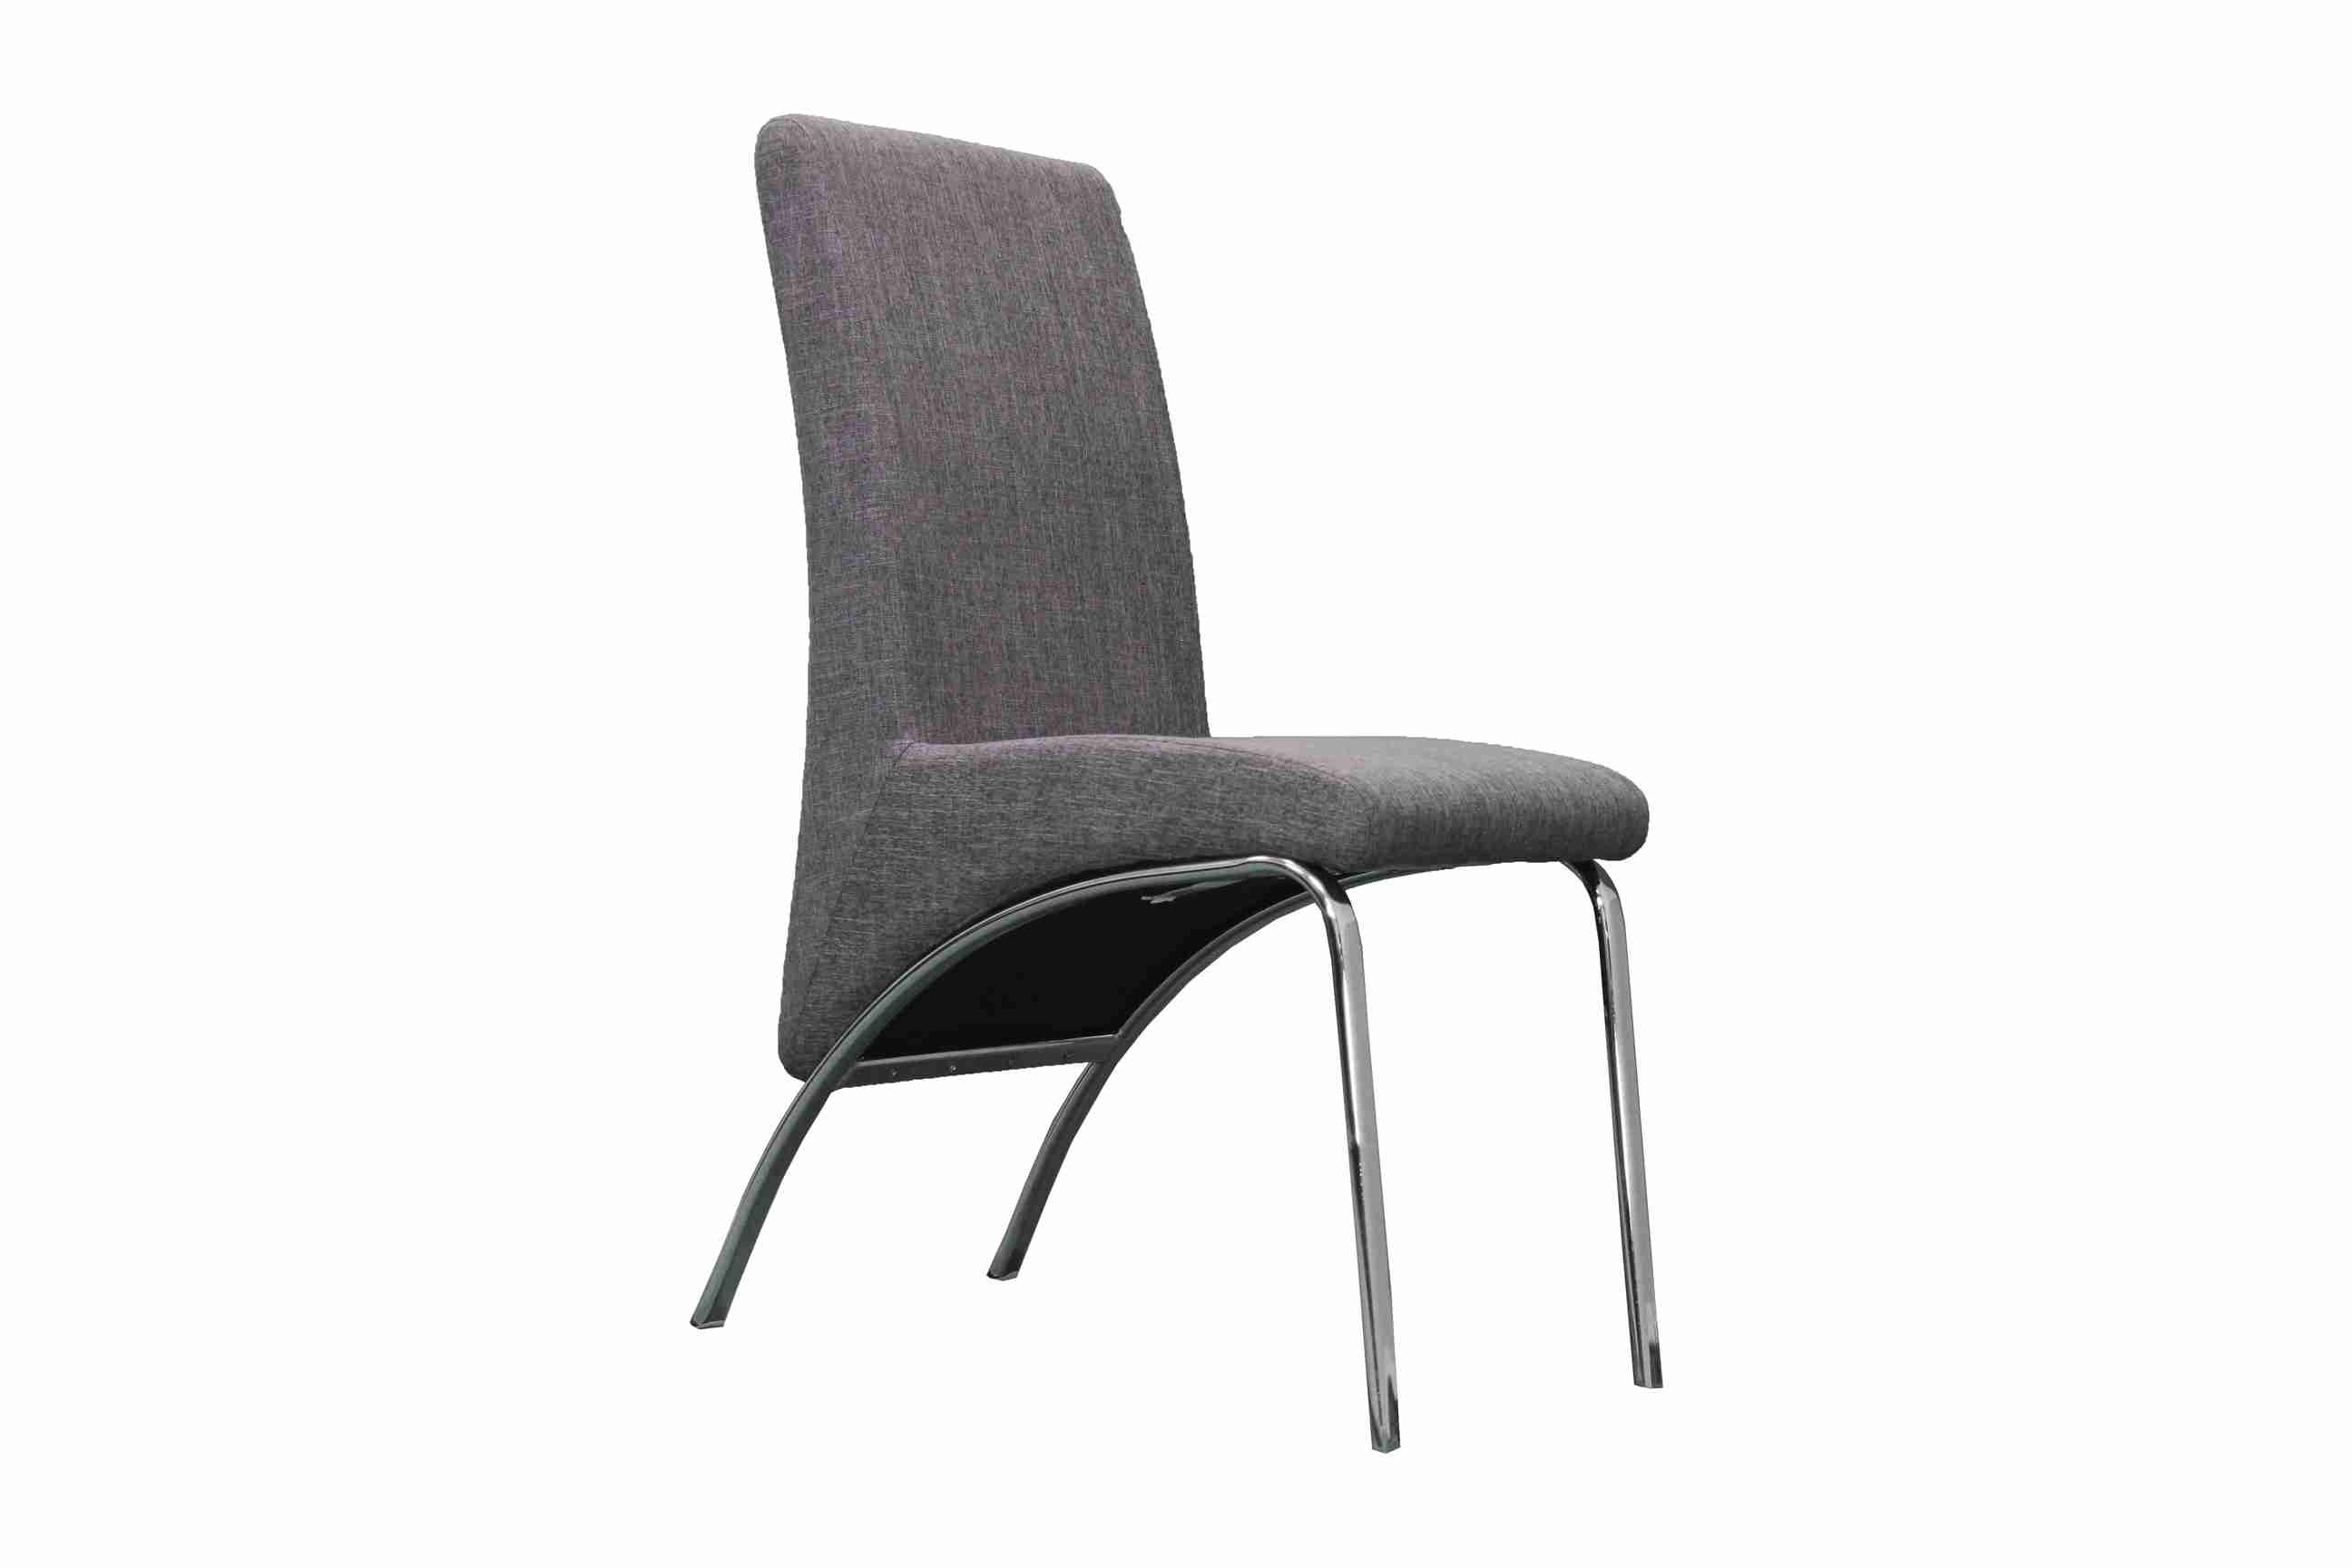 Side Chair Solid Linen Upholstered Chair in D. Gray (Set of 2) -UH-958-DARK GRAY